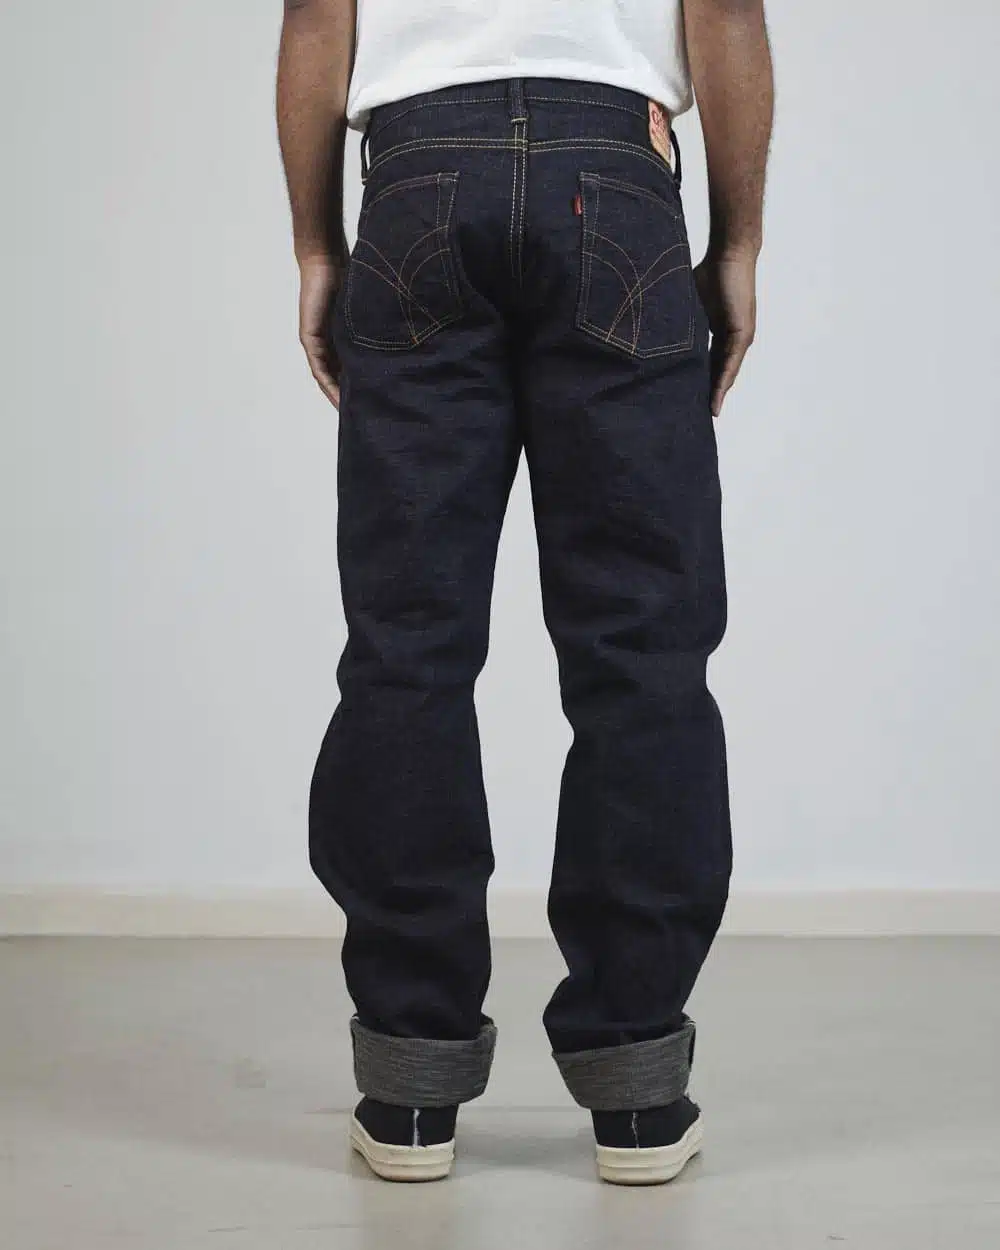 The Strike Gold SG5104 15oz Tapered Jeans